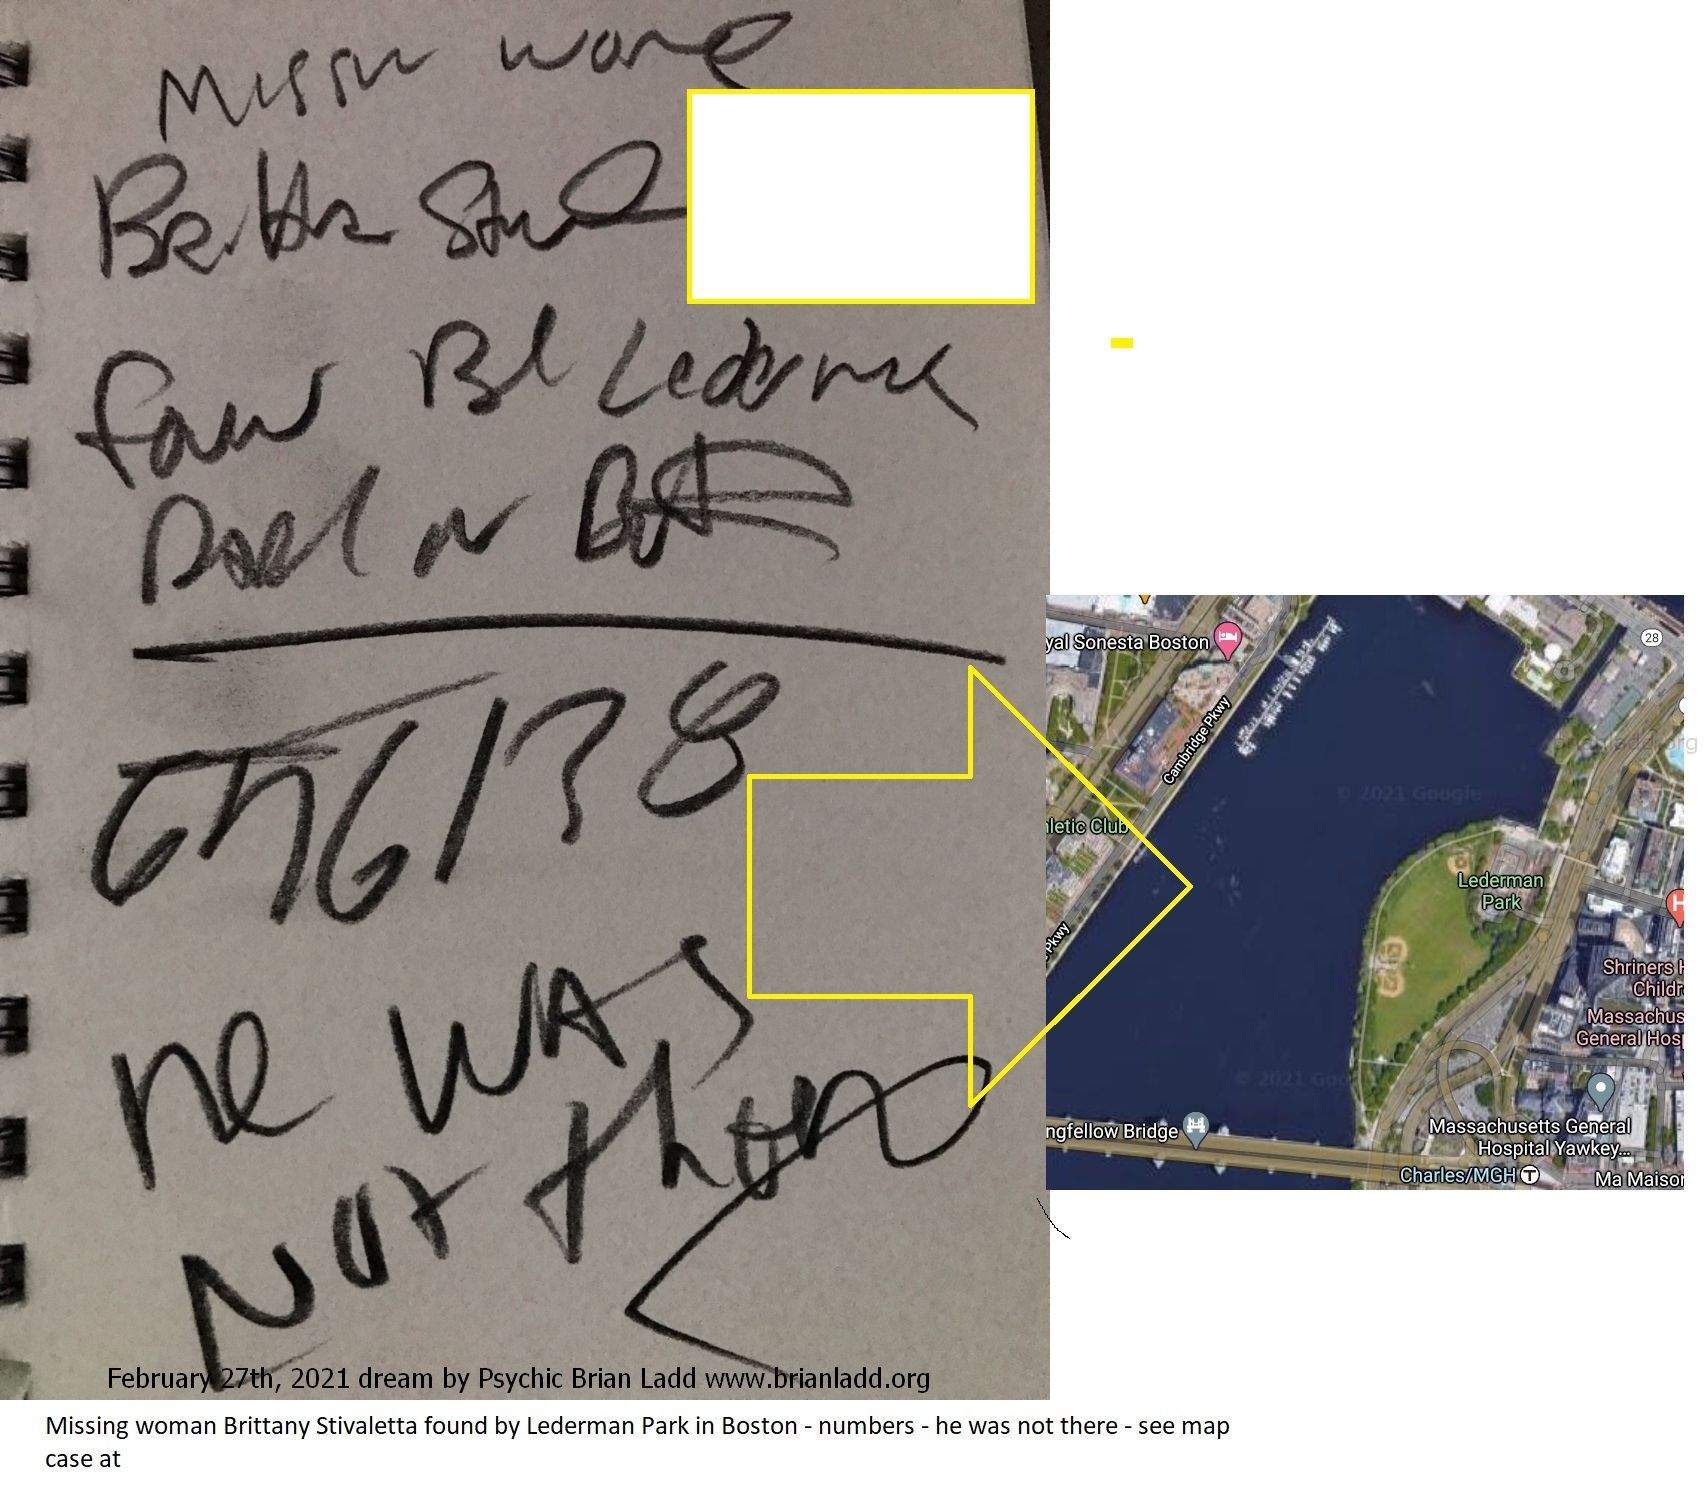 Missing Woman Brittany Stivaletta Found By Lederman Park In Boston Numbers He Was Not There See Map - Missing Woman Brit...
Missing Woman Brittany Stivaletta Found By Lederman Park In Boston - Numbers - He Was Not There - See Map  Case At   https://briansprediction.com/Brittany-Stivaletta-found
